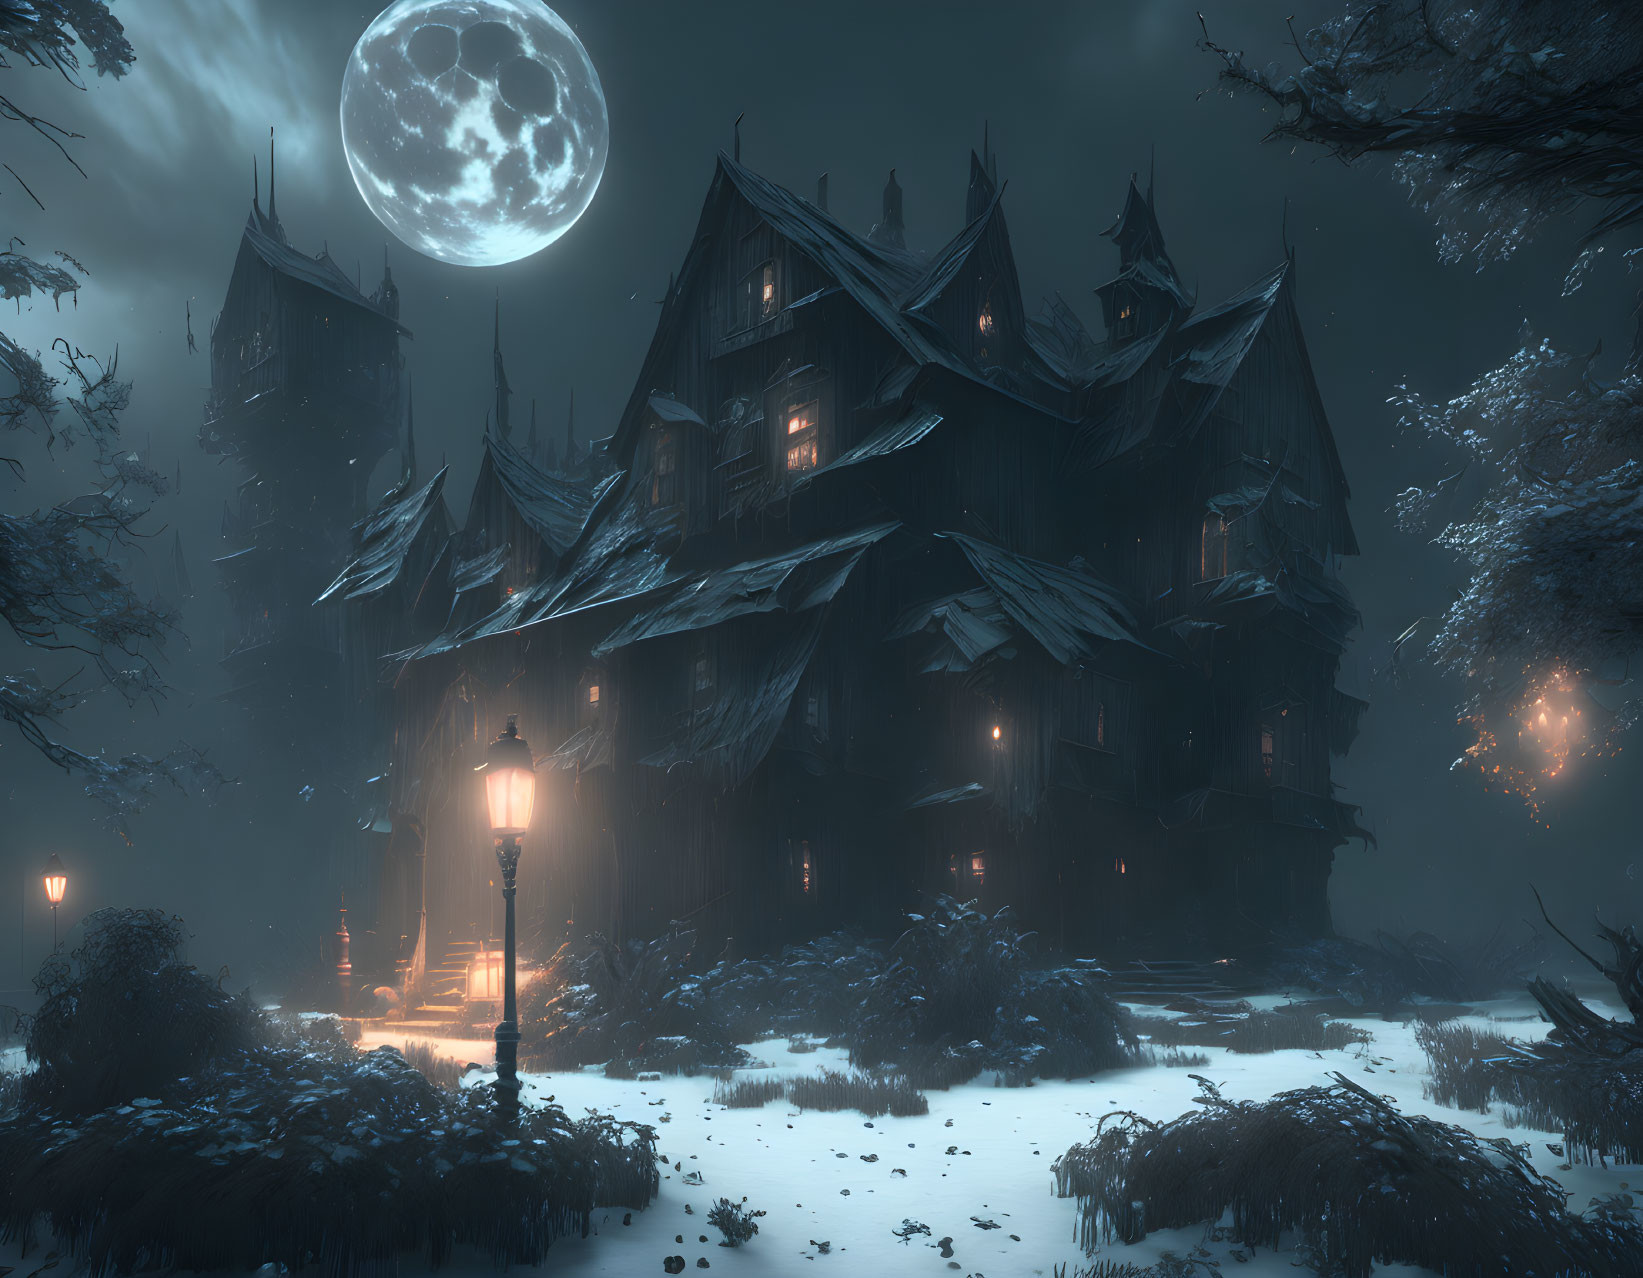 The Sinister Manor in the Dark Forest